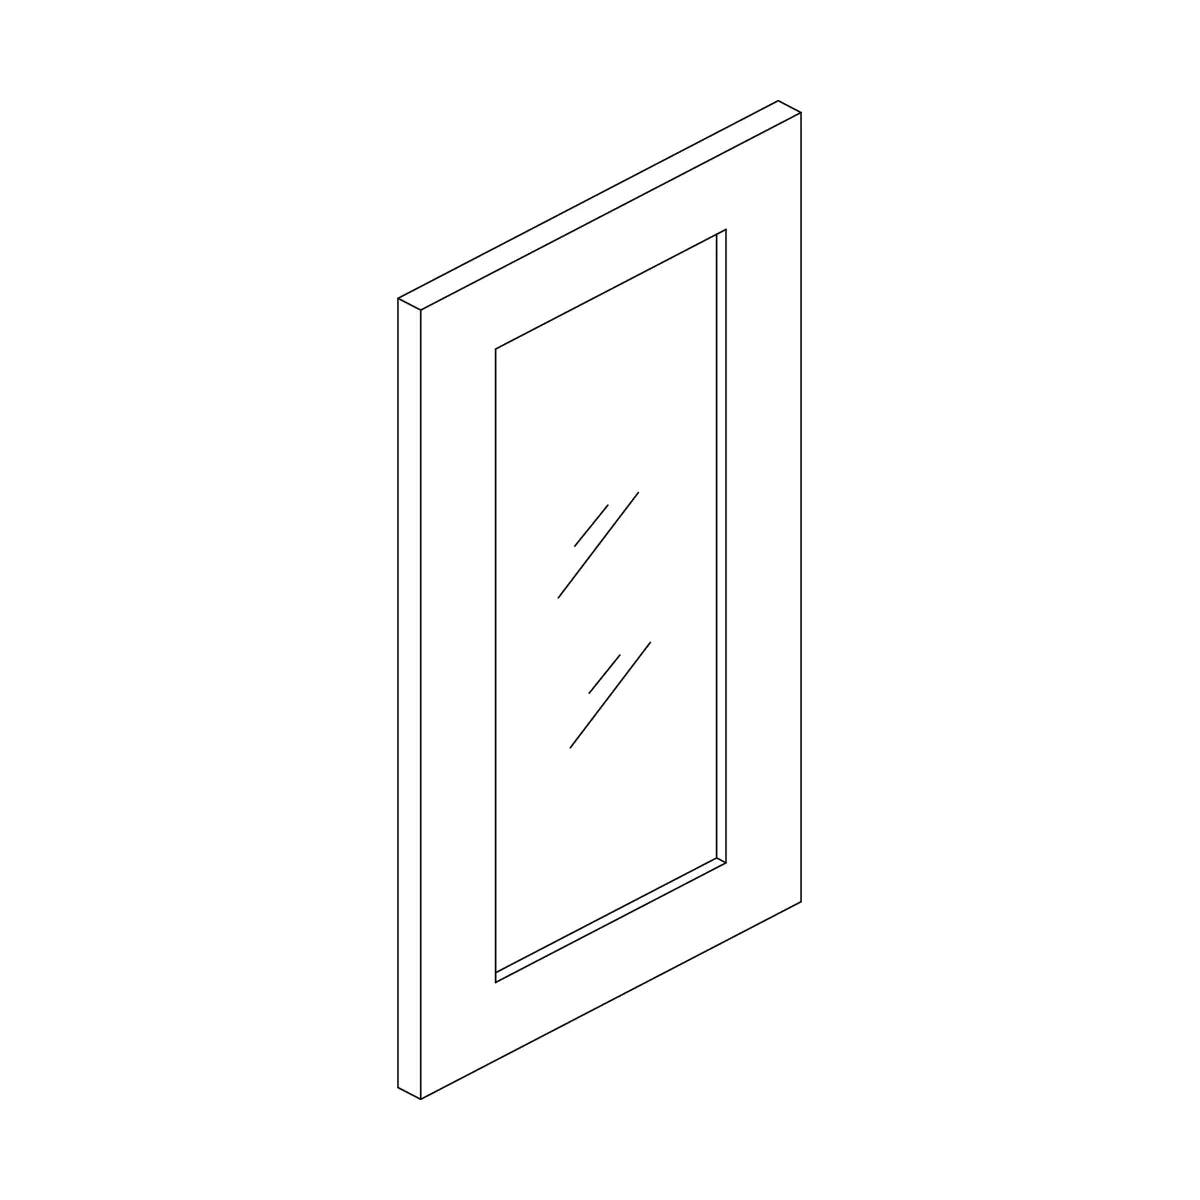 Craft Cabinetry Recessed Panel Gray Stain 17.7”W x 41”H Glass Door for W3642 Image Specifications